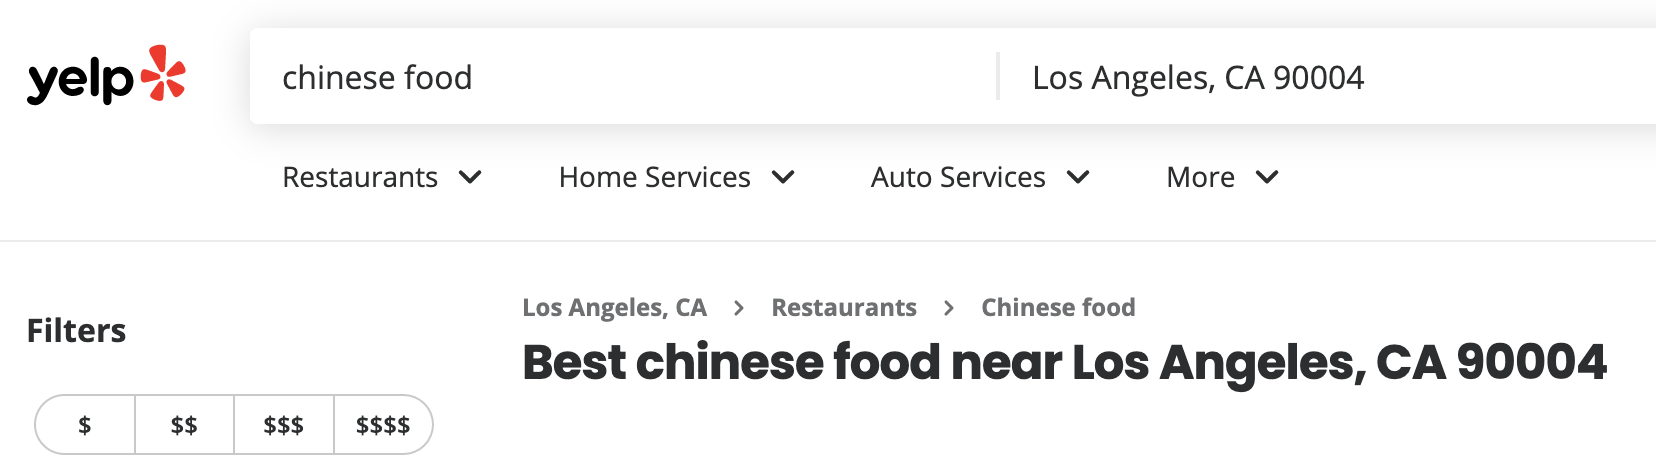 A Yelp search for Chinese food